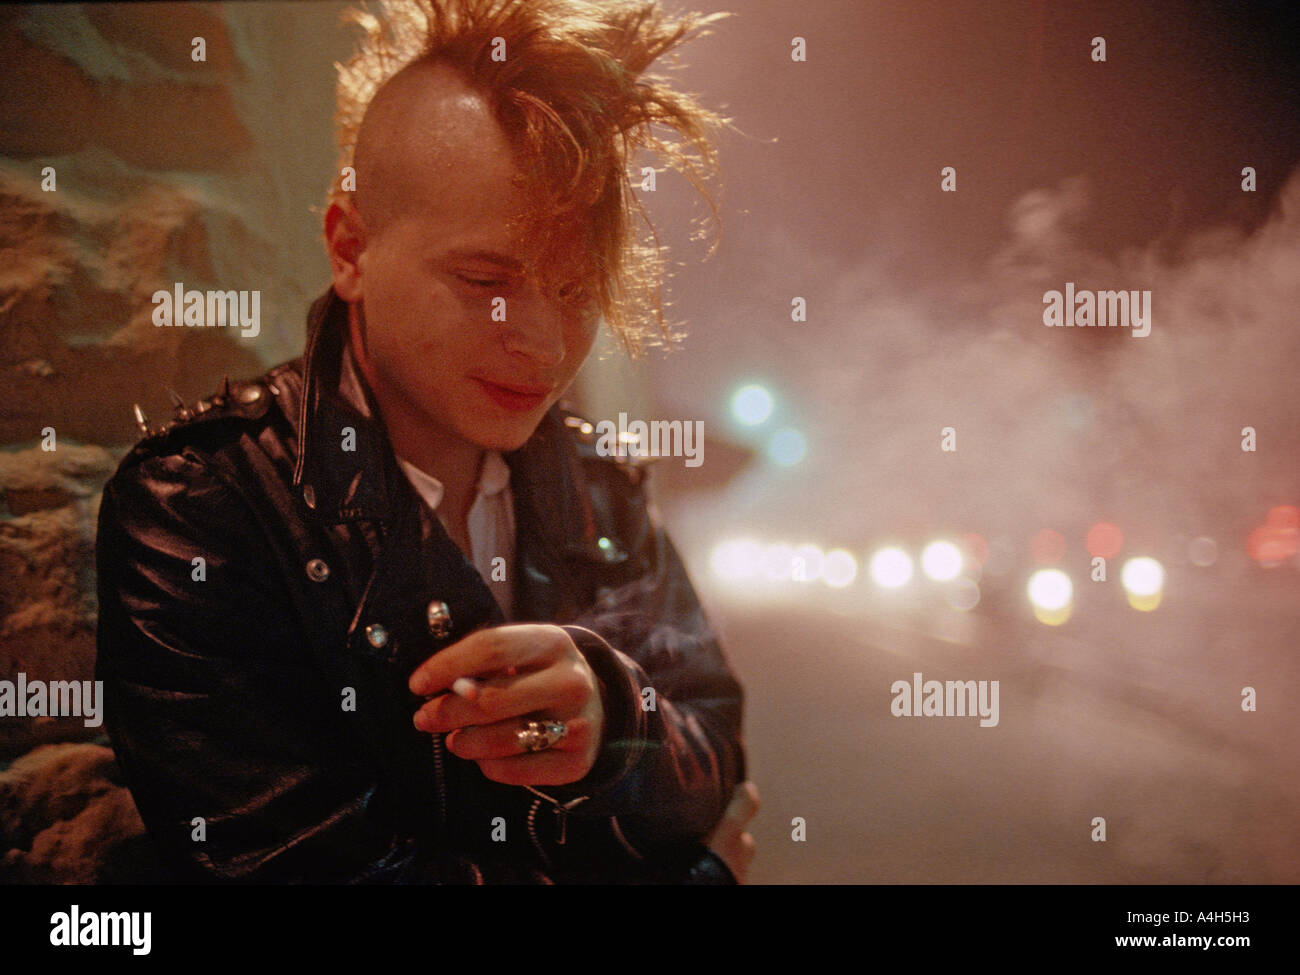 Young man with mohawk haircut smokes a cigarette outside an alternative nightclub club in Jacksonville Florida USA Stock Photo